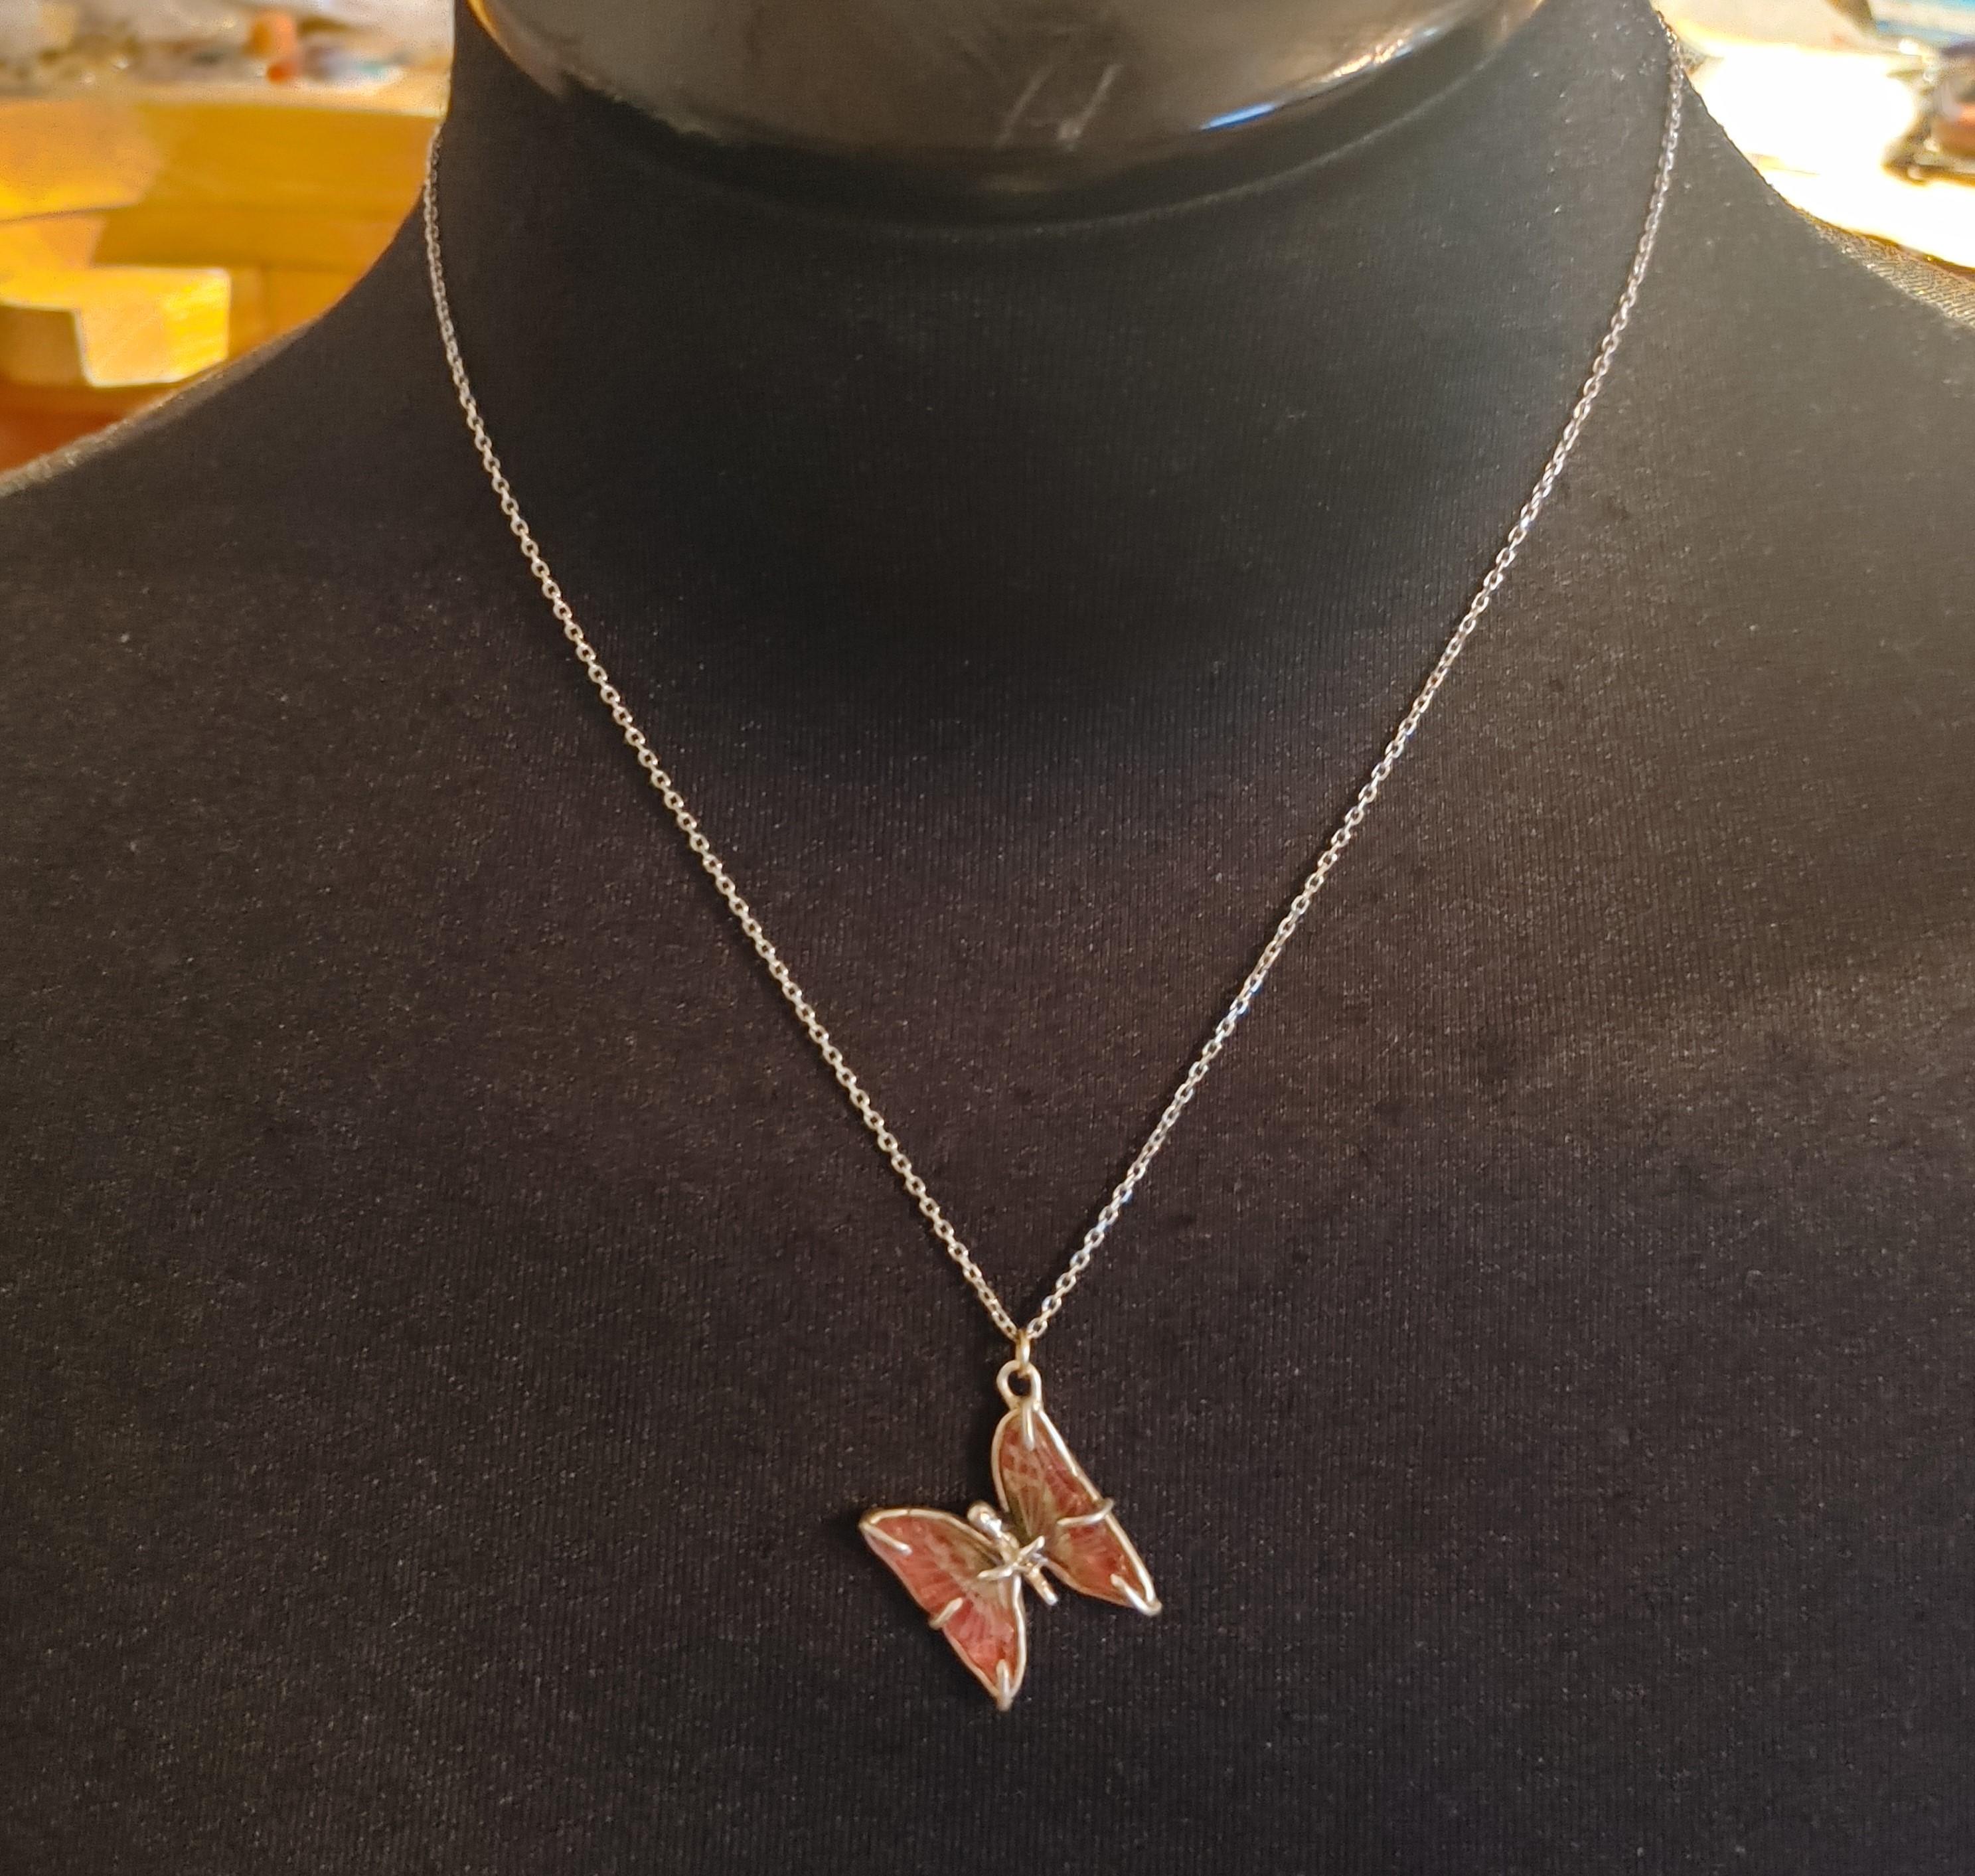 The Butterfly Necklace creates the illusion of a butterfly that is about to fly away, adding movement to an otherwise rigid piece. The Butterfly is made out of a carved Pink Tourmaline Wings with bits of green, being held together by prongs and the